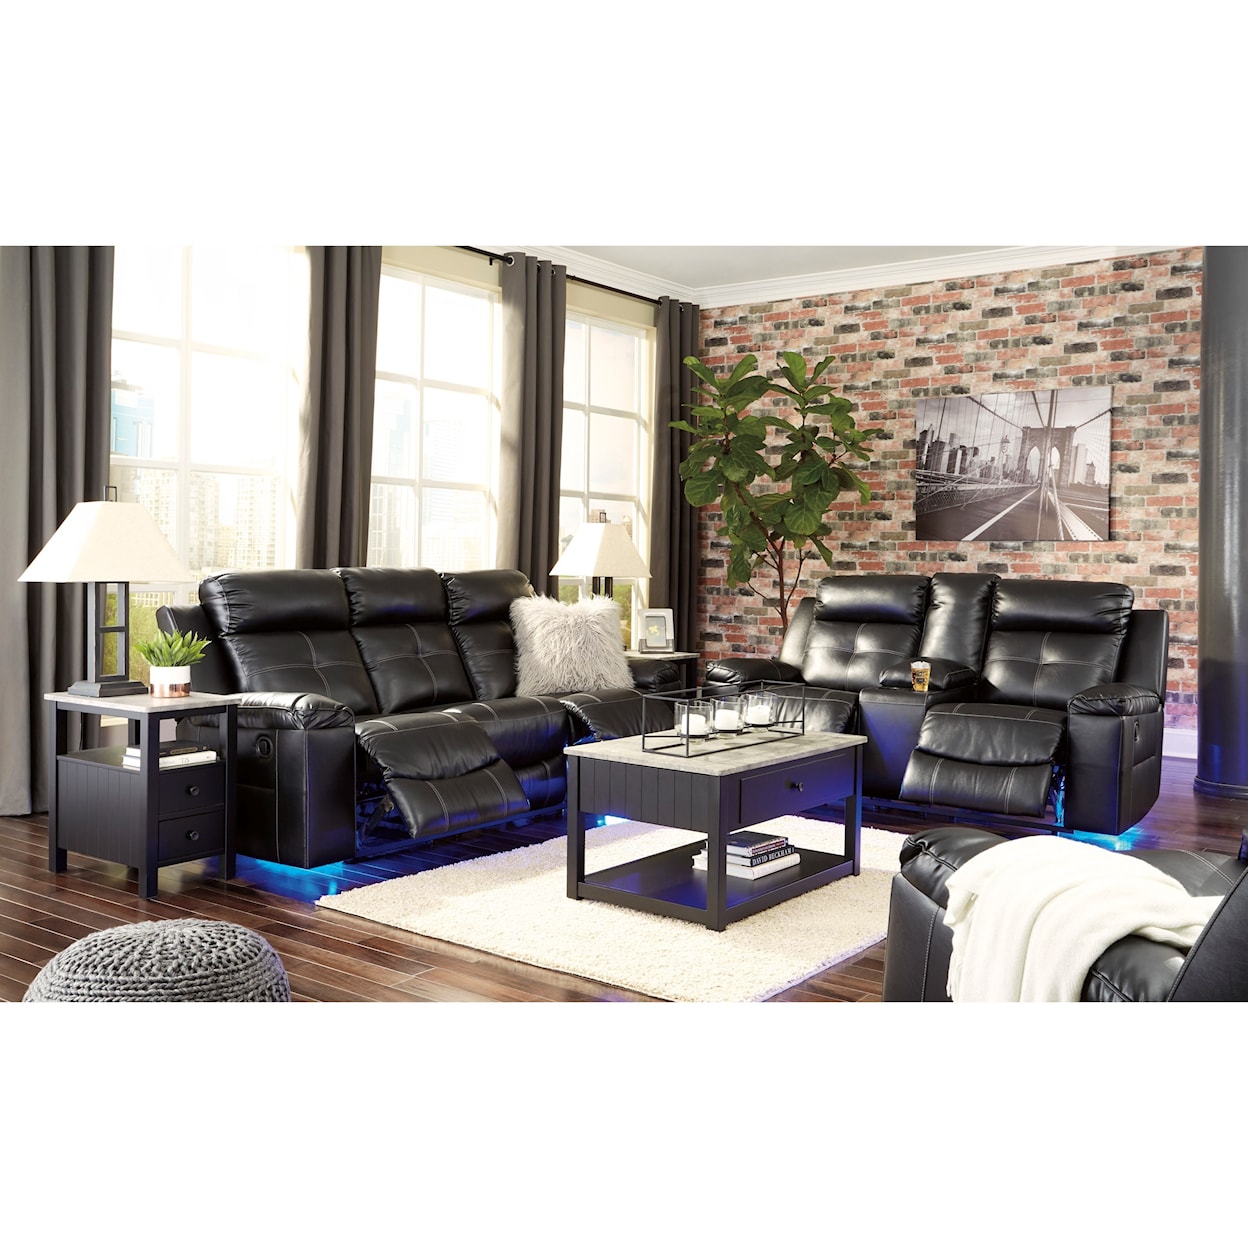 Signature Design by Ashley Kempten Reclining Living Room Group